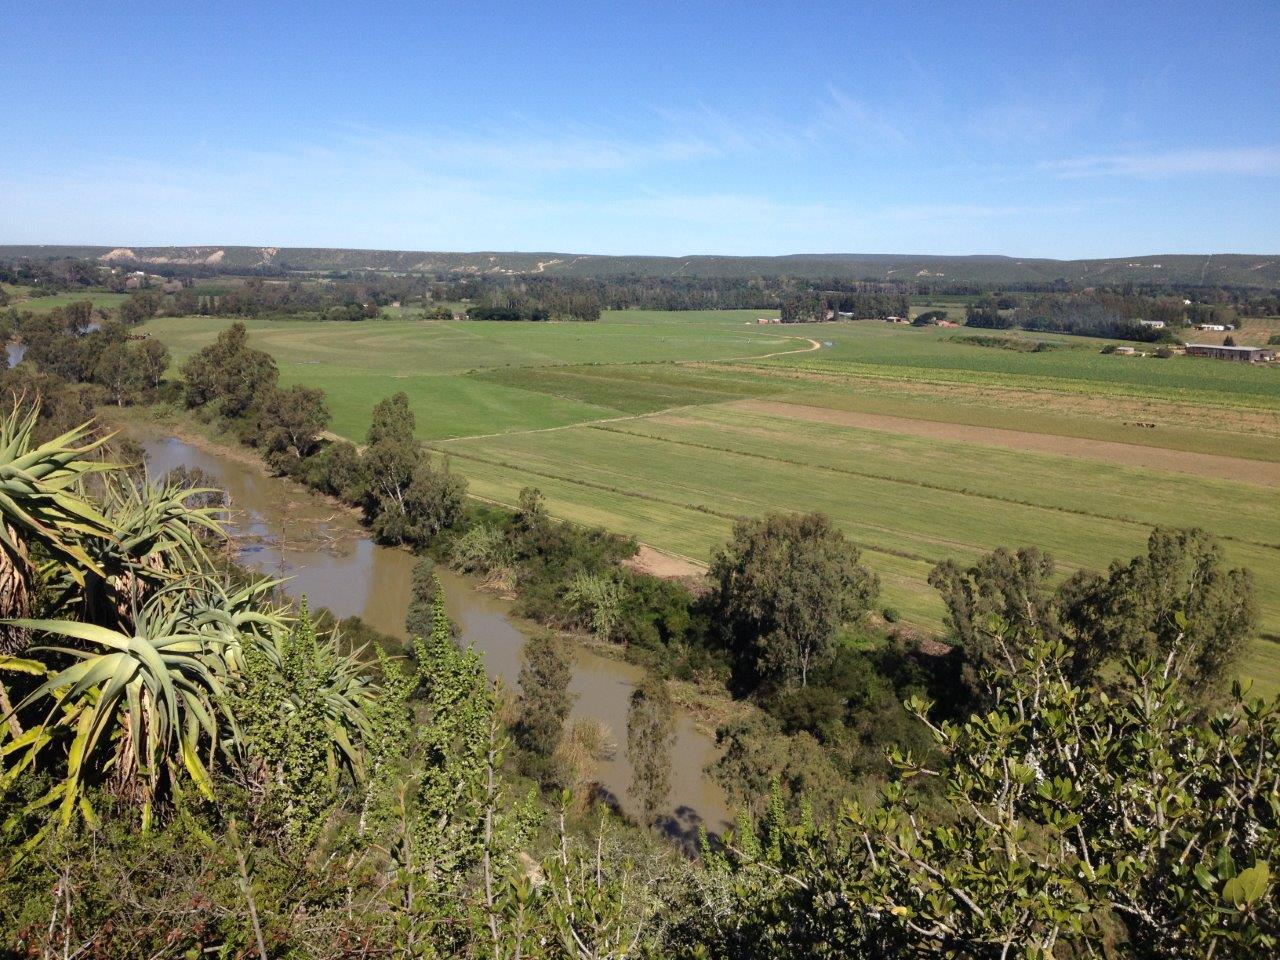 View over the countryside from 'The Lookout'